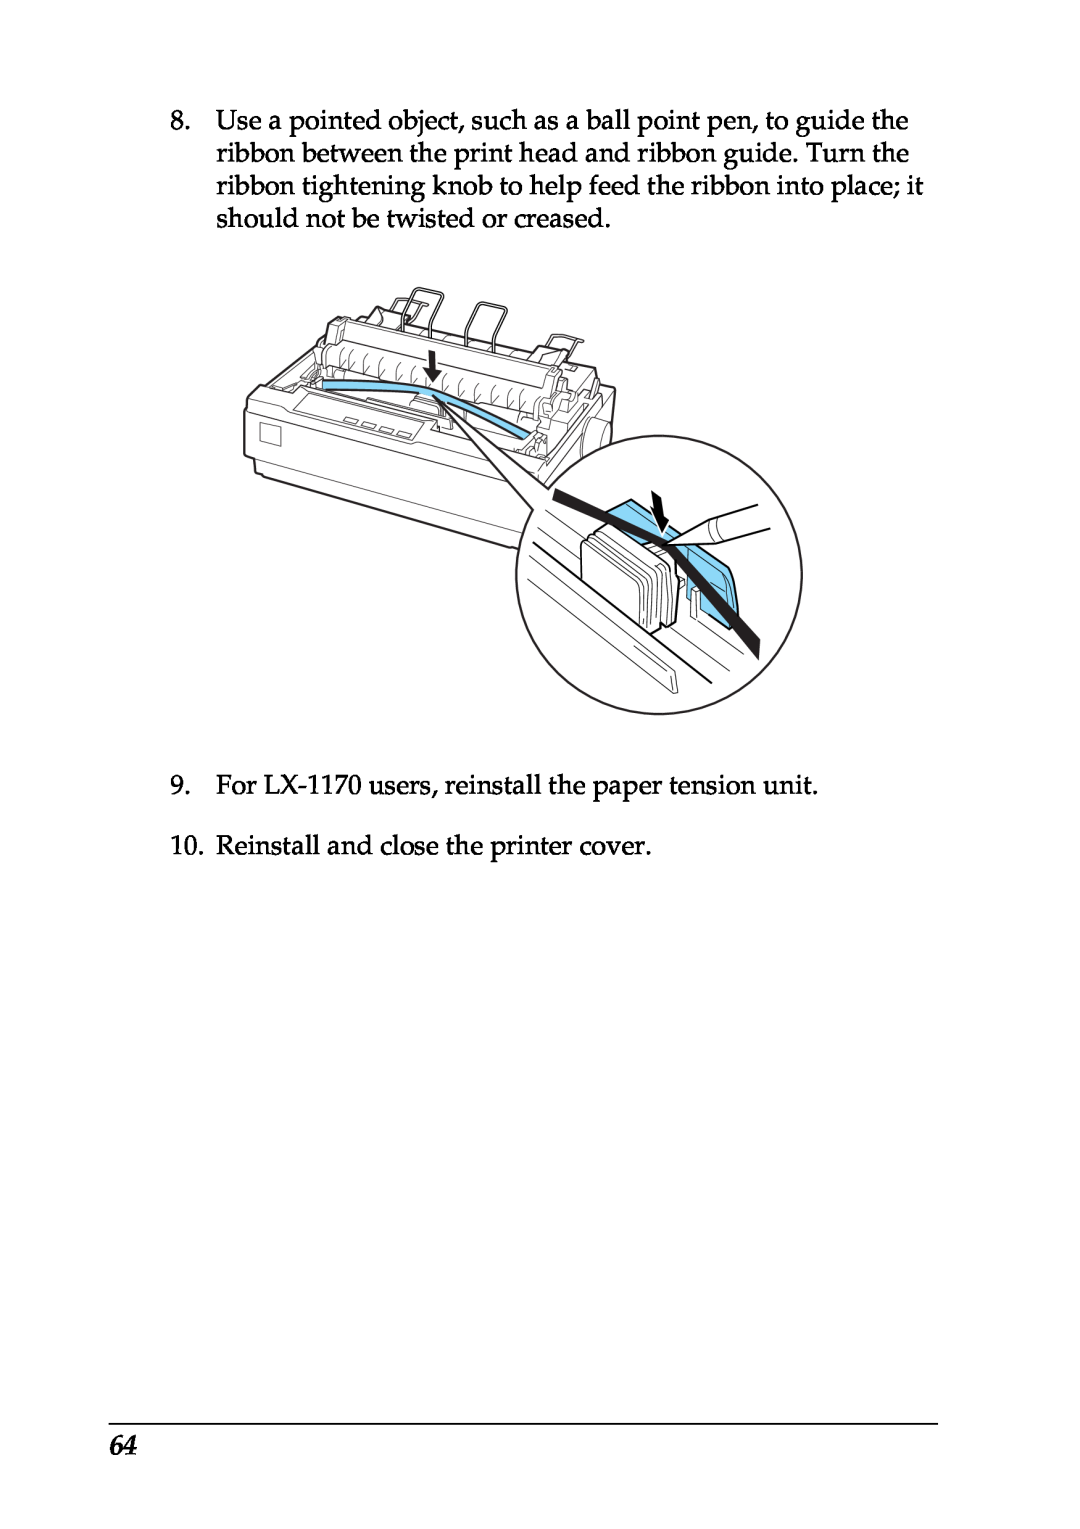 Epson manual For LX-1170 users, reinstall the paper tension unit, Reinstall and close the printer cover 